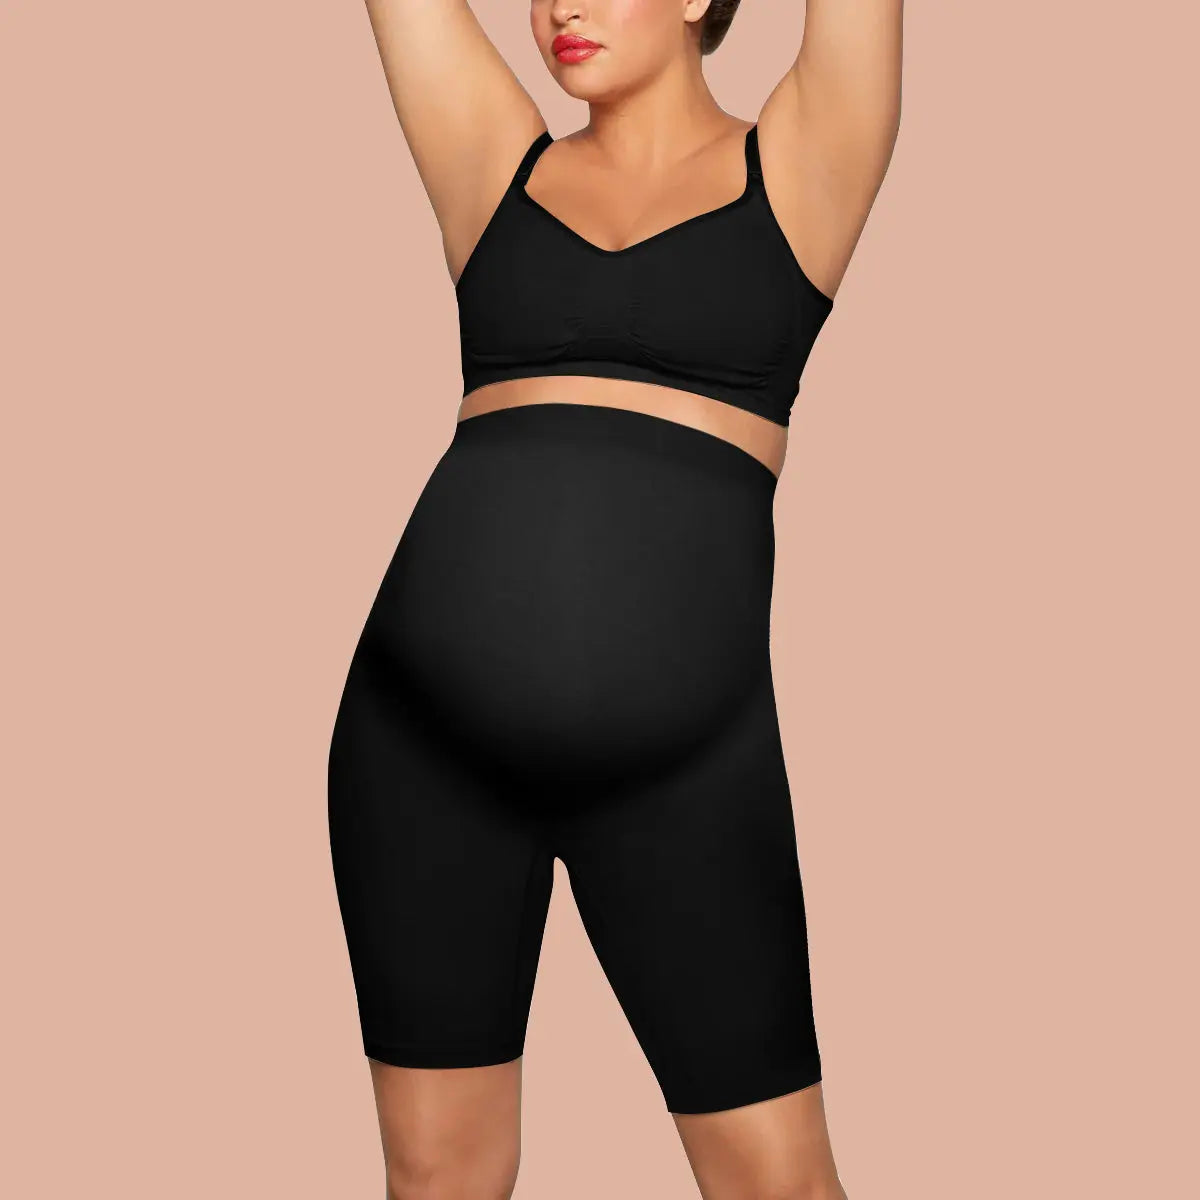 SHAPERX Maternity Sculpting Mid Thigh Shorts for Women